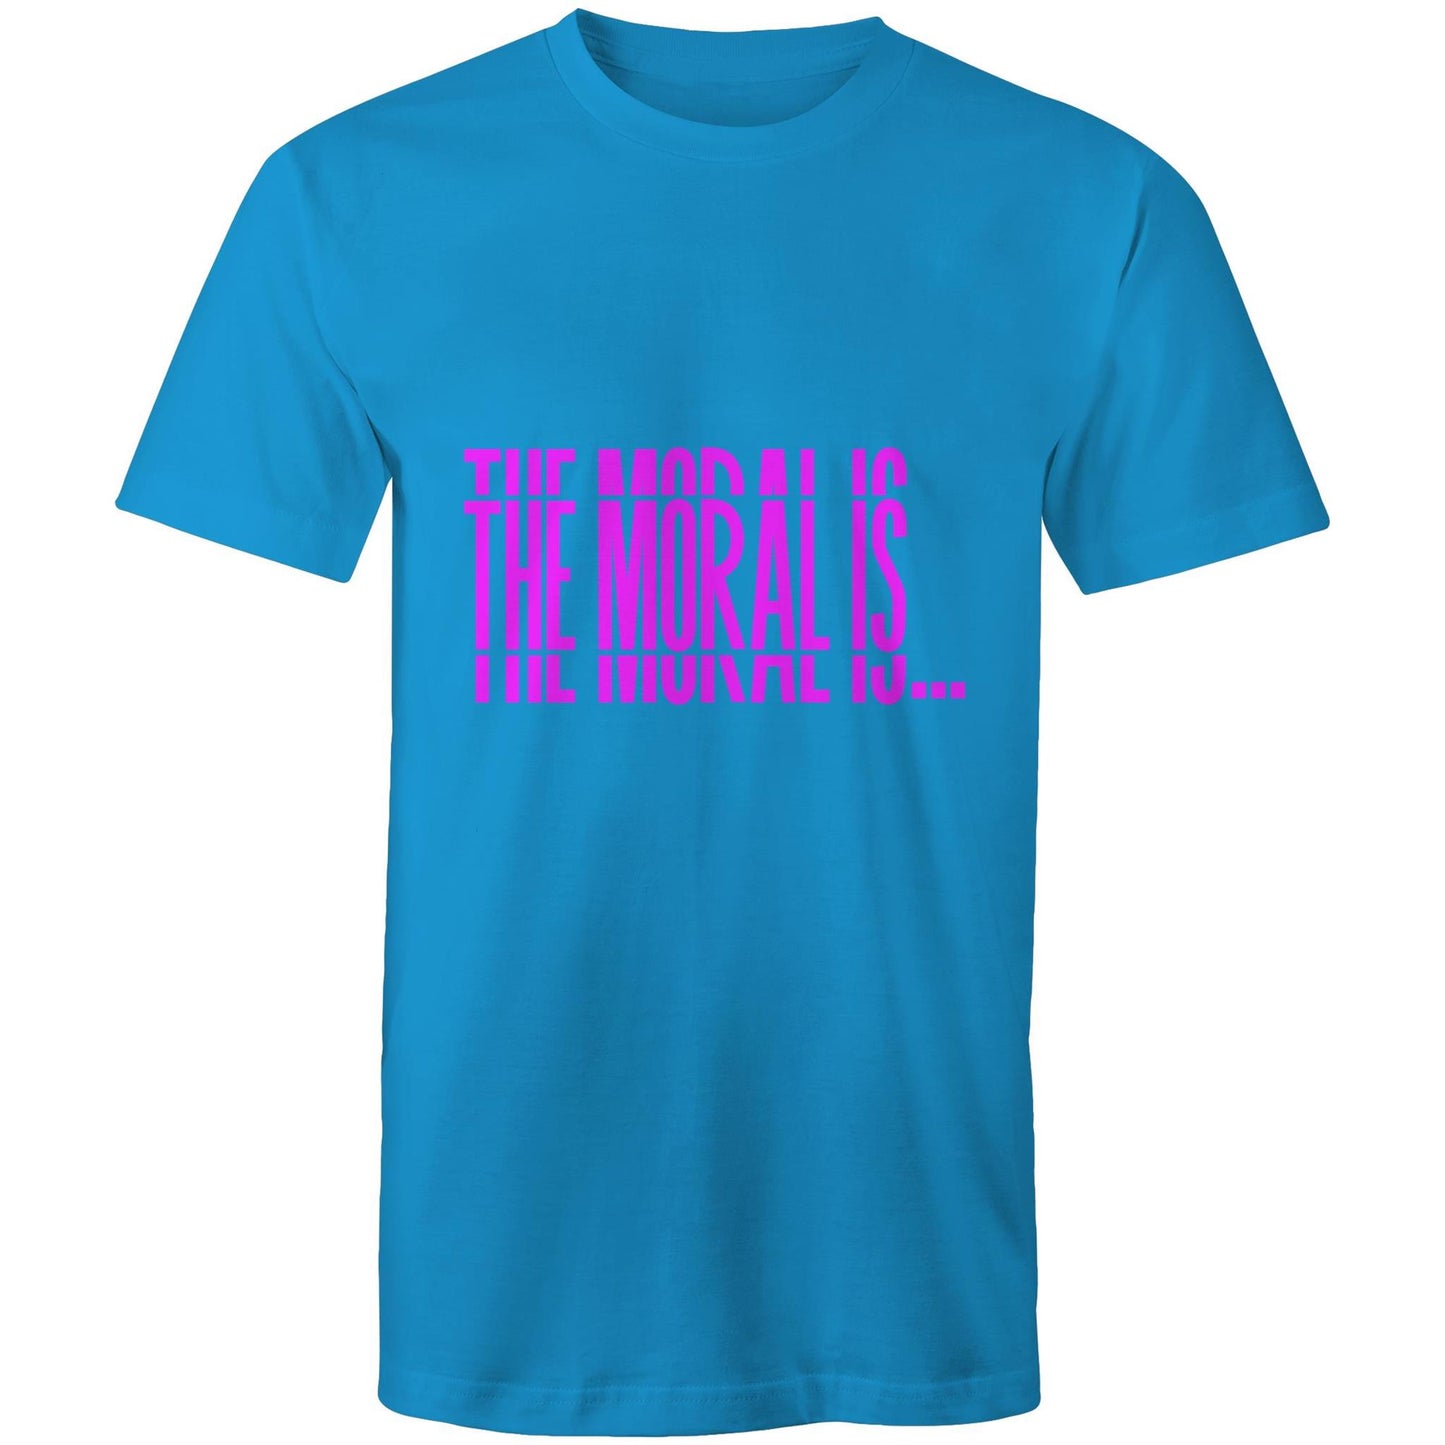 The Moral Is... AS Colour Staple - Mens T-Shirt